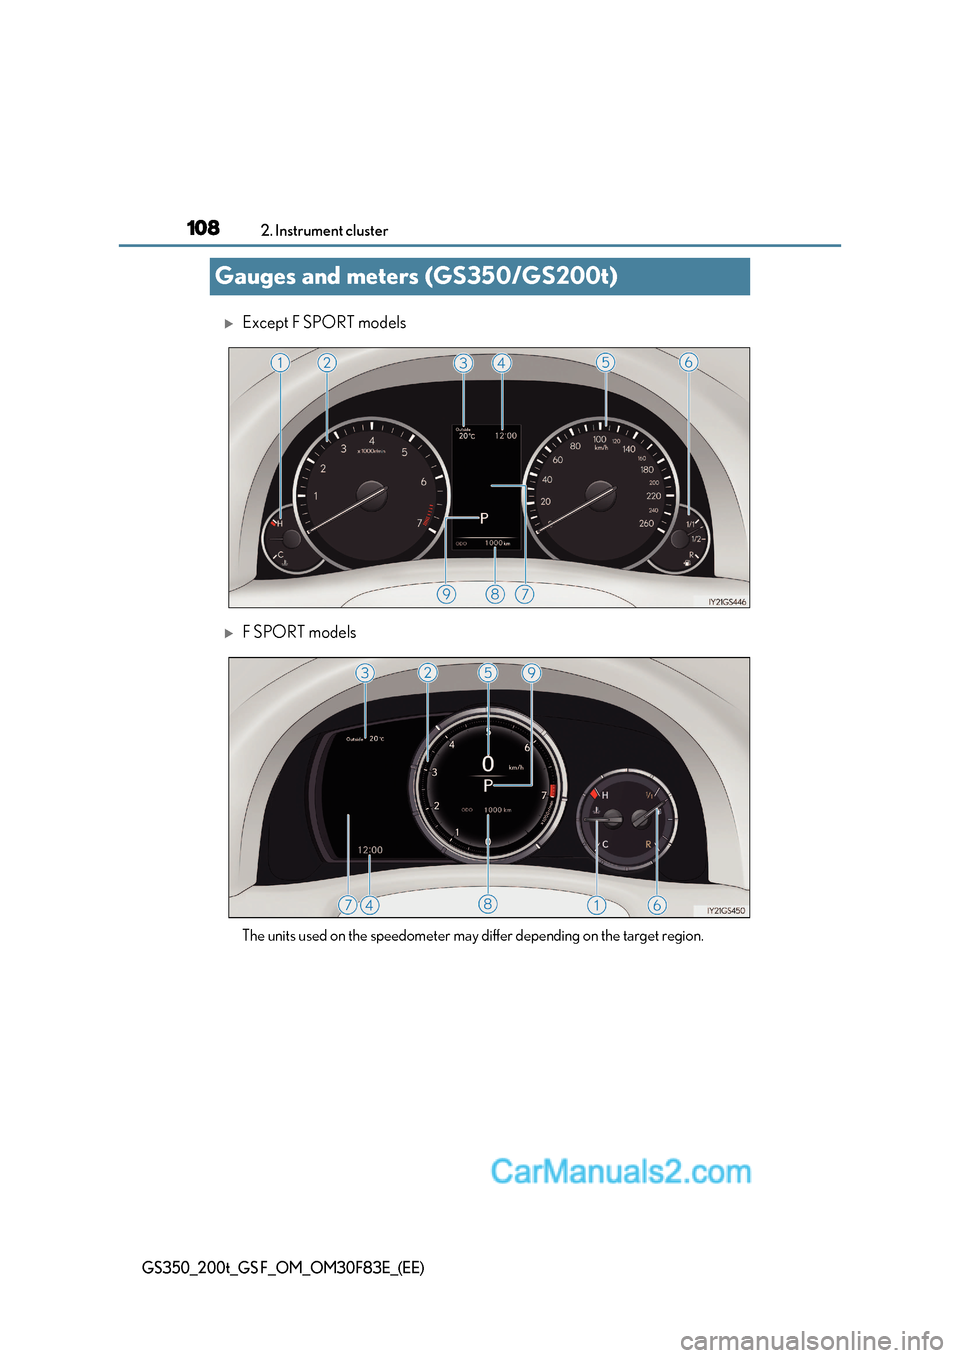 Lexus GS350 2017  Owners Manual 1082. Instrument cluster
GS350_200t_GS F_OM_OM30F83E_(EE)
Gauges and meters (GS350/GS200t)
Except F SPORT models
F SPORT models 
The units used on the speedometer may differ depending on the tar